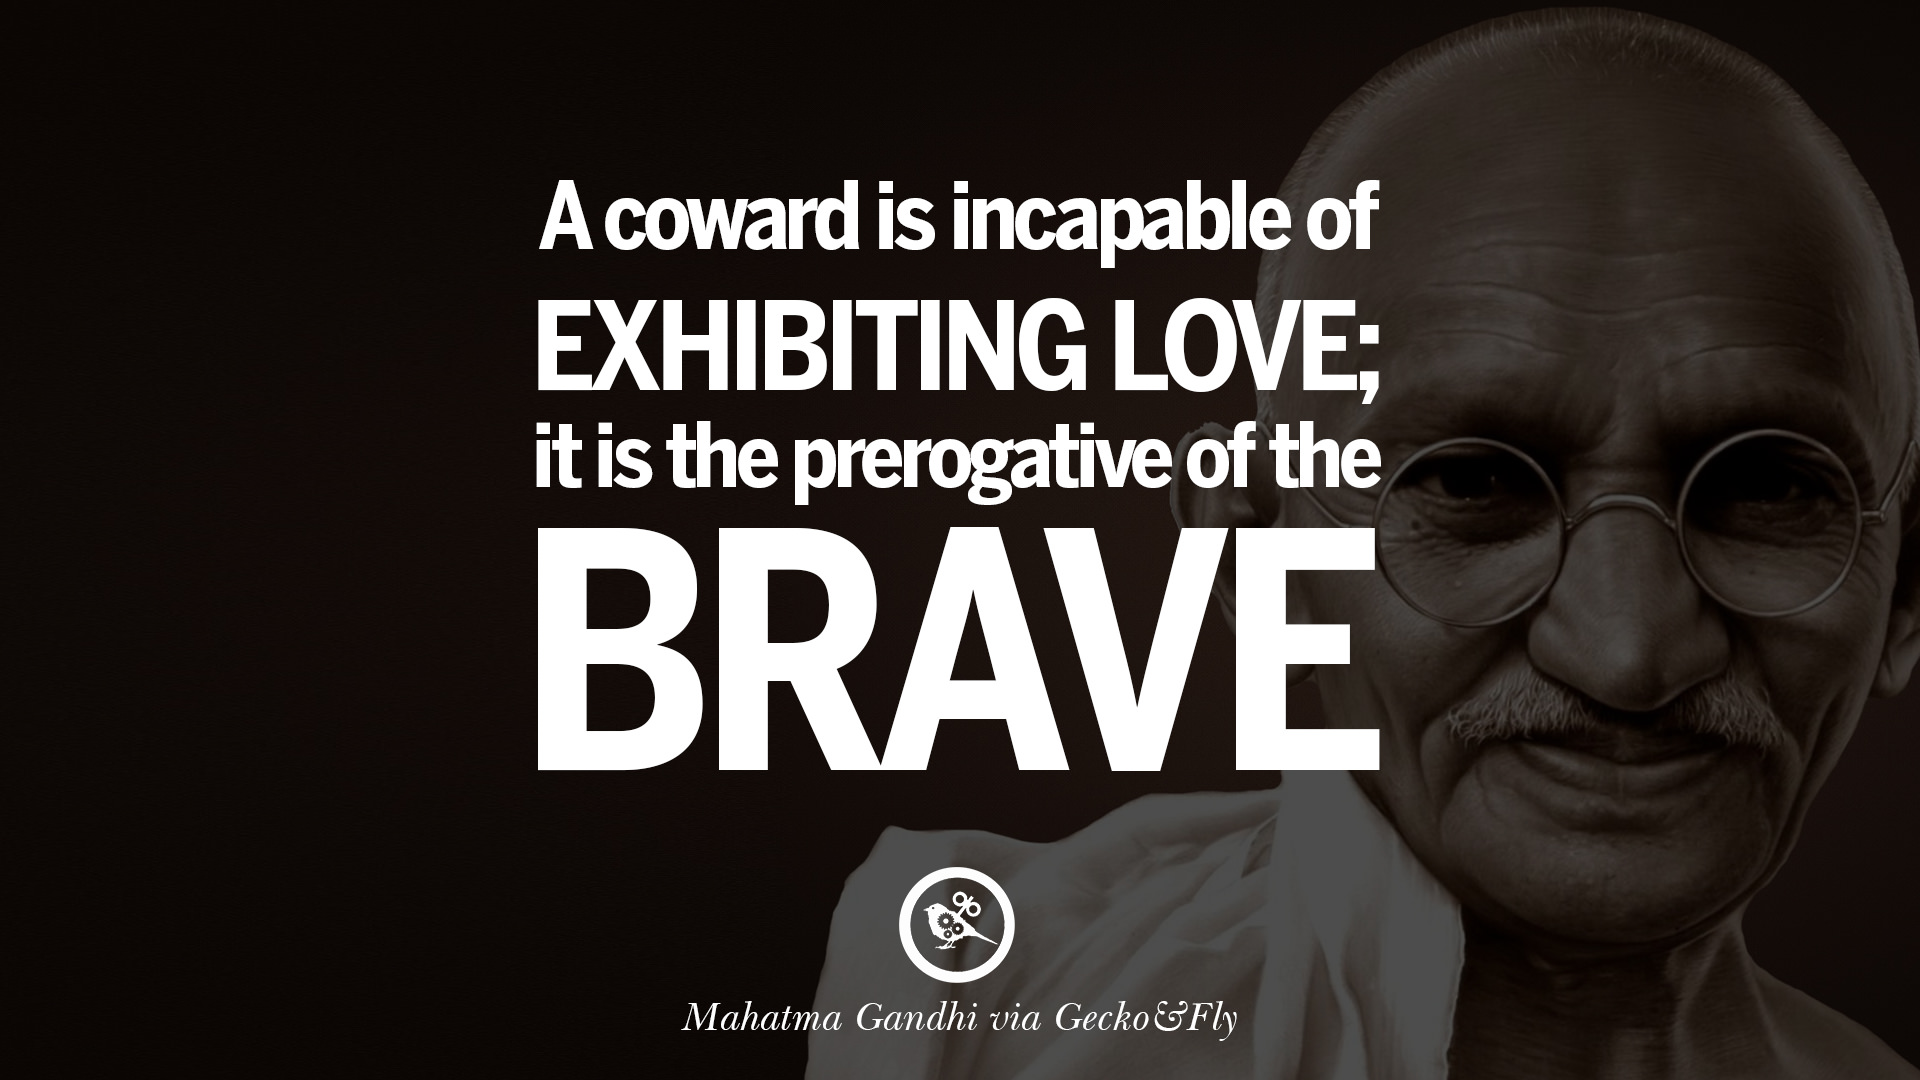 28 Mahatma Gandhi Quotes And Frases On Peace, Protest, And Civil Liberties-2491